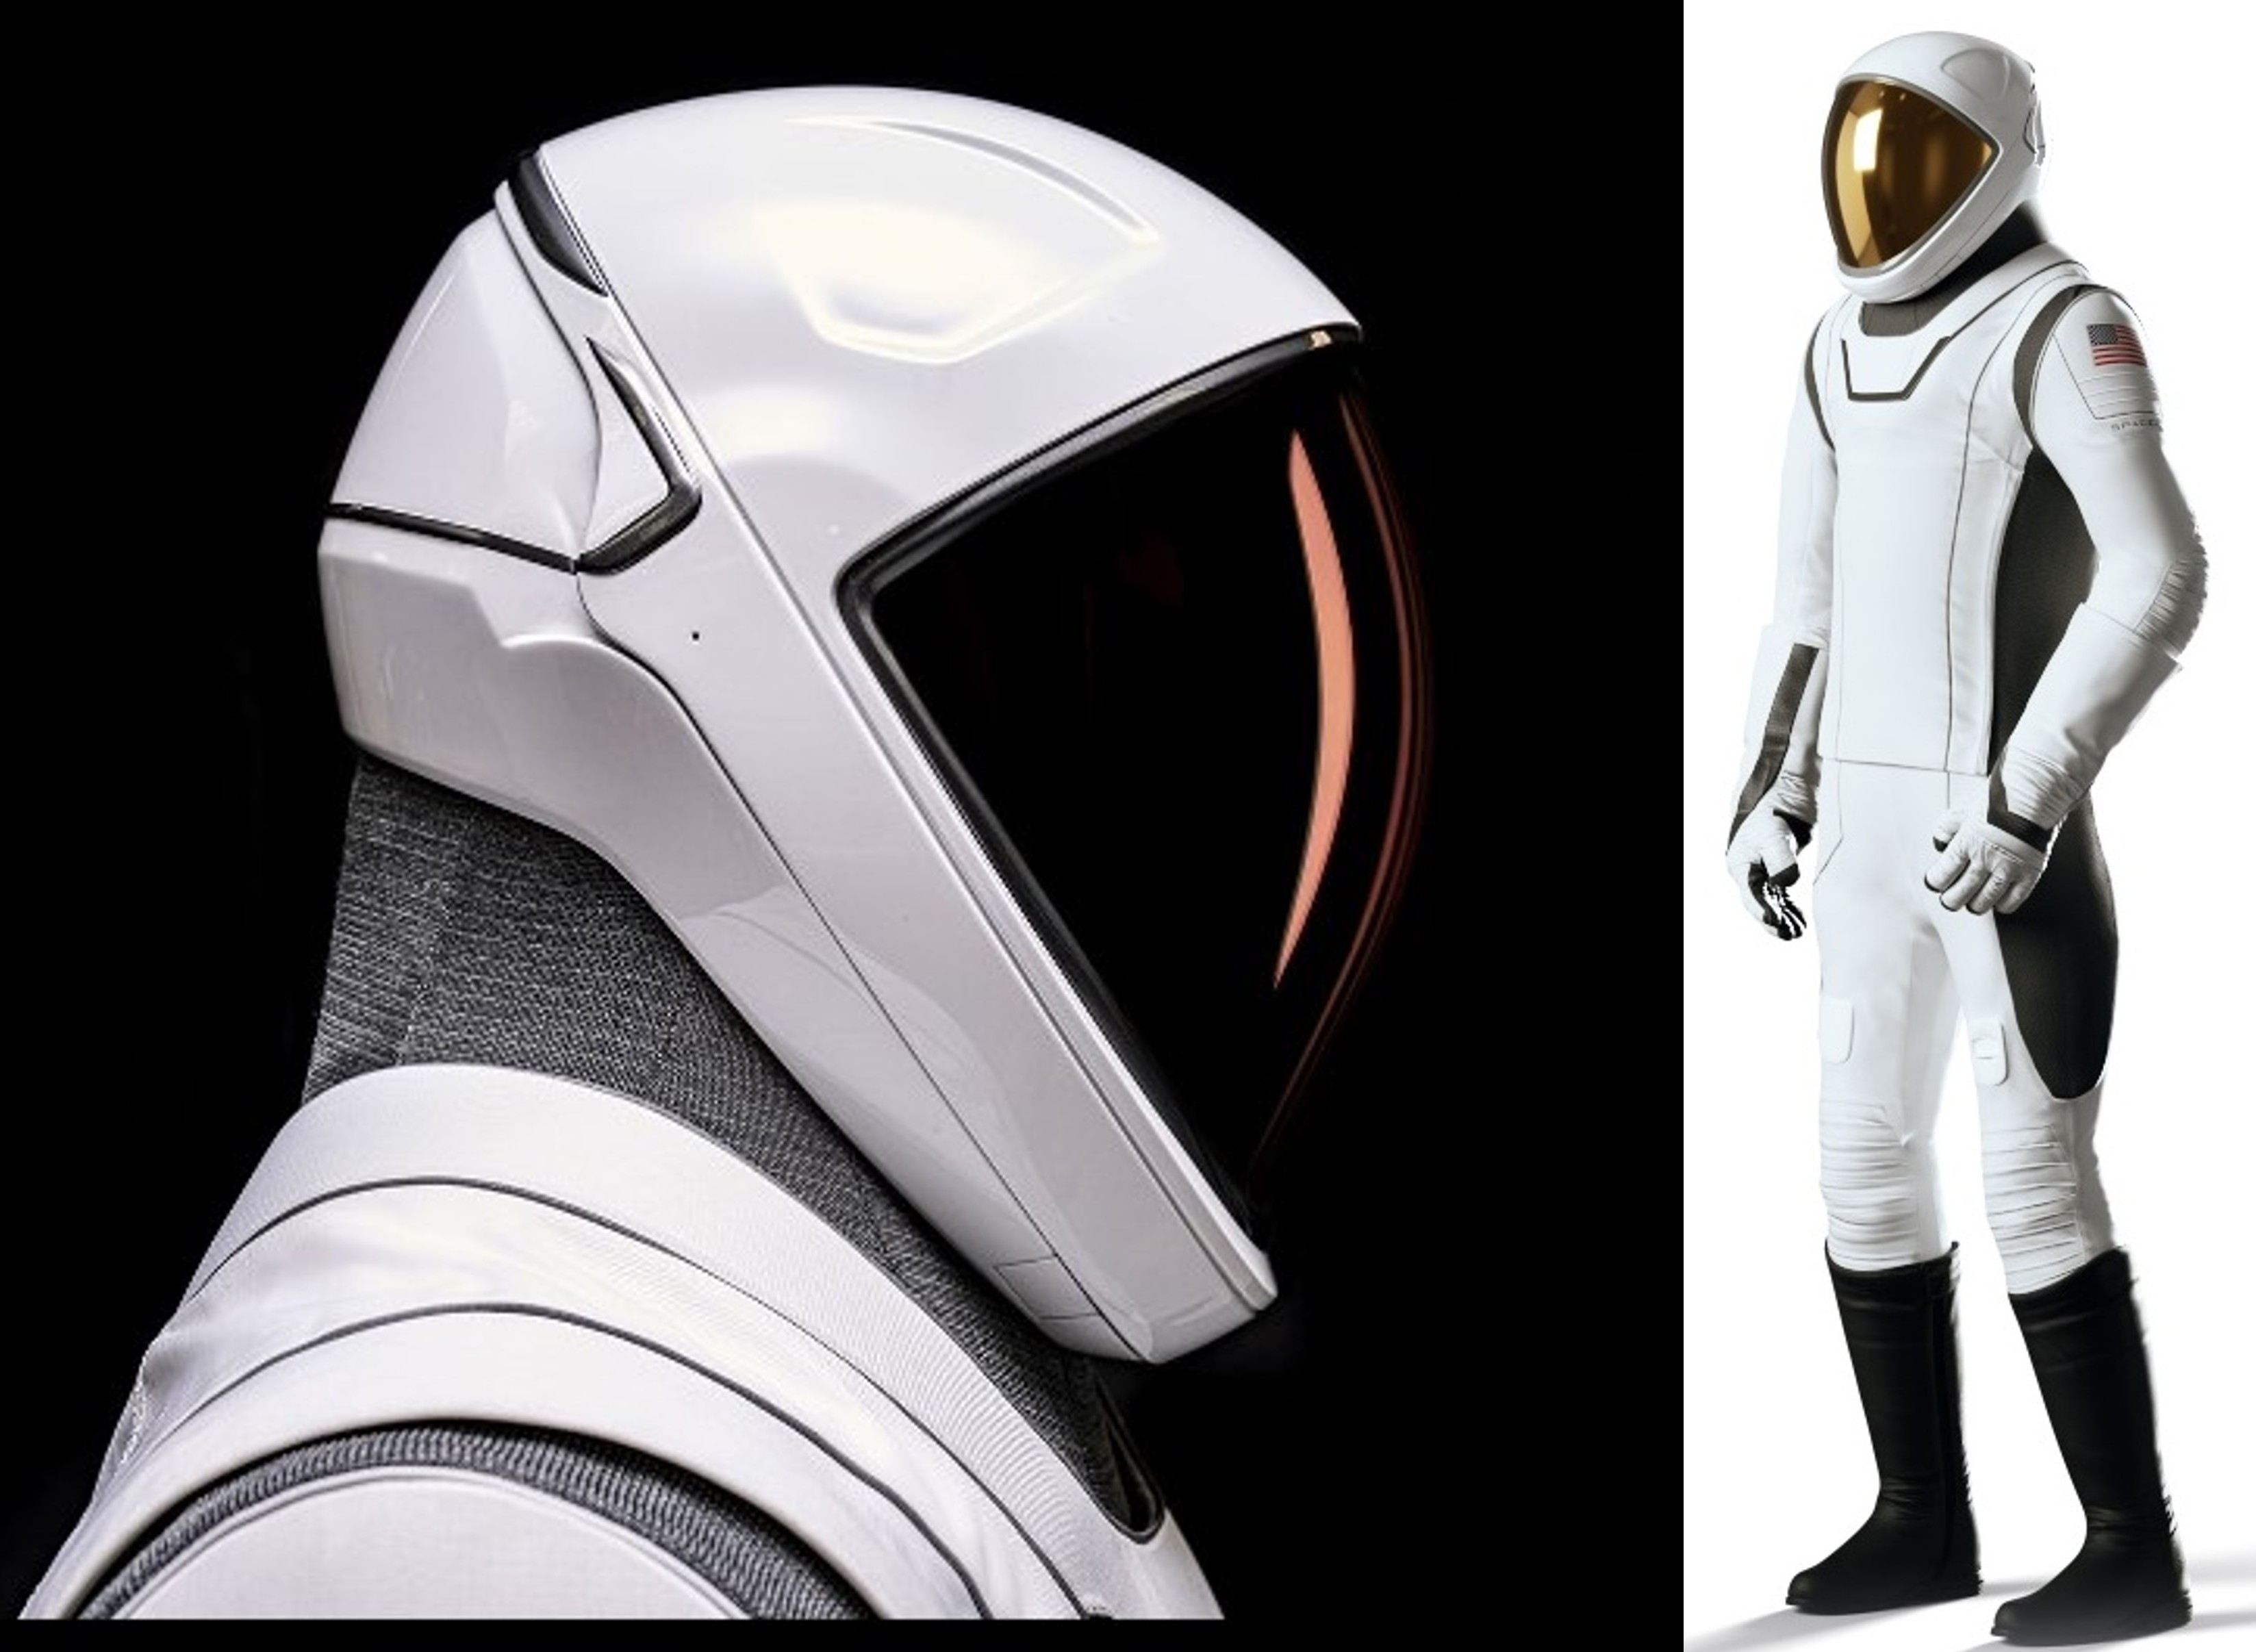 On the left, a bust profile view of a white space suite facing right.  On the right, in a thinner section of the image, that full spacesuit, looking to the left.  The white is accented with dark gray sections, black boots and a copper gold visor.